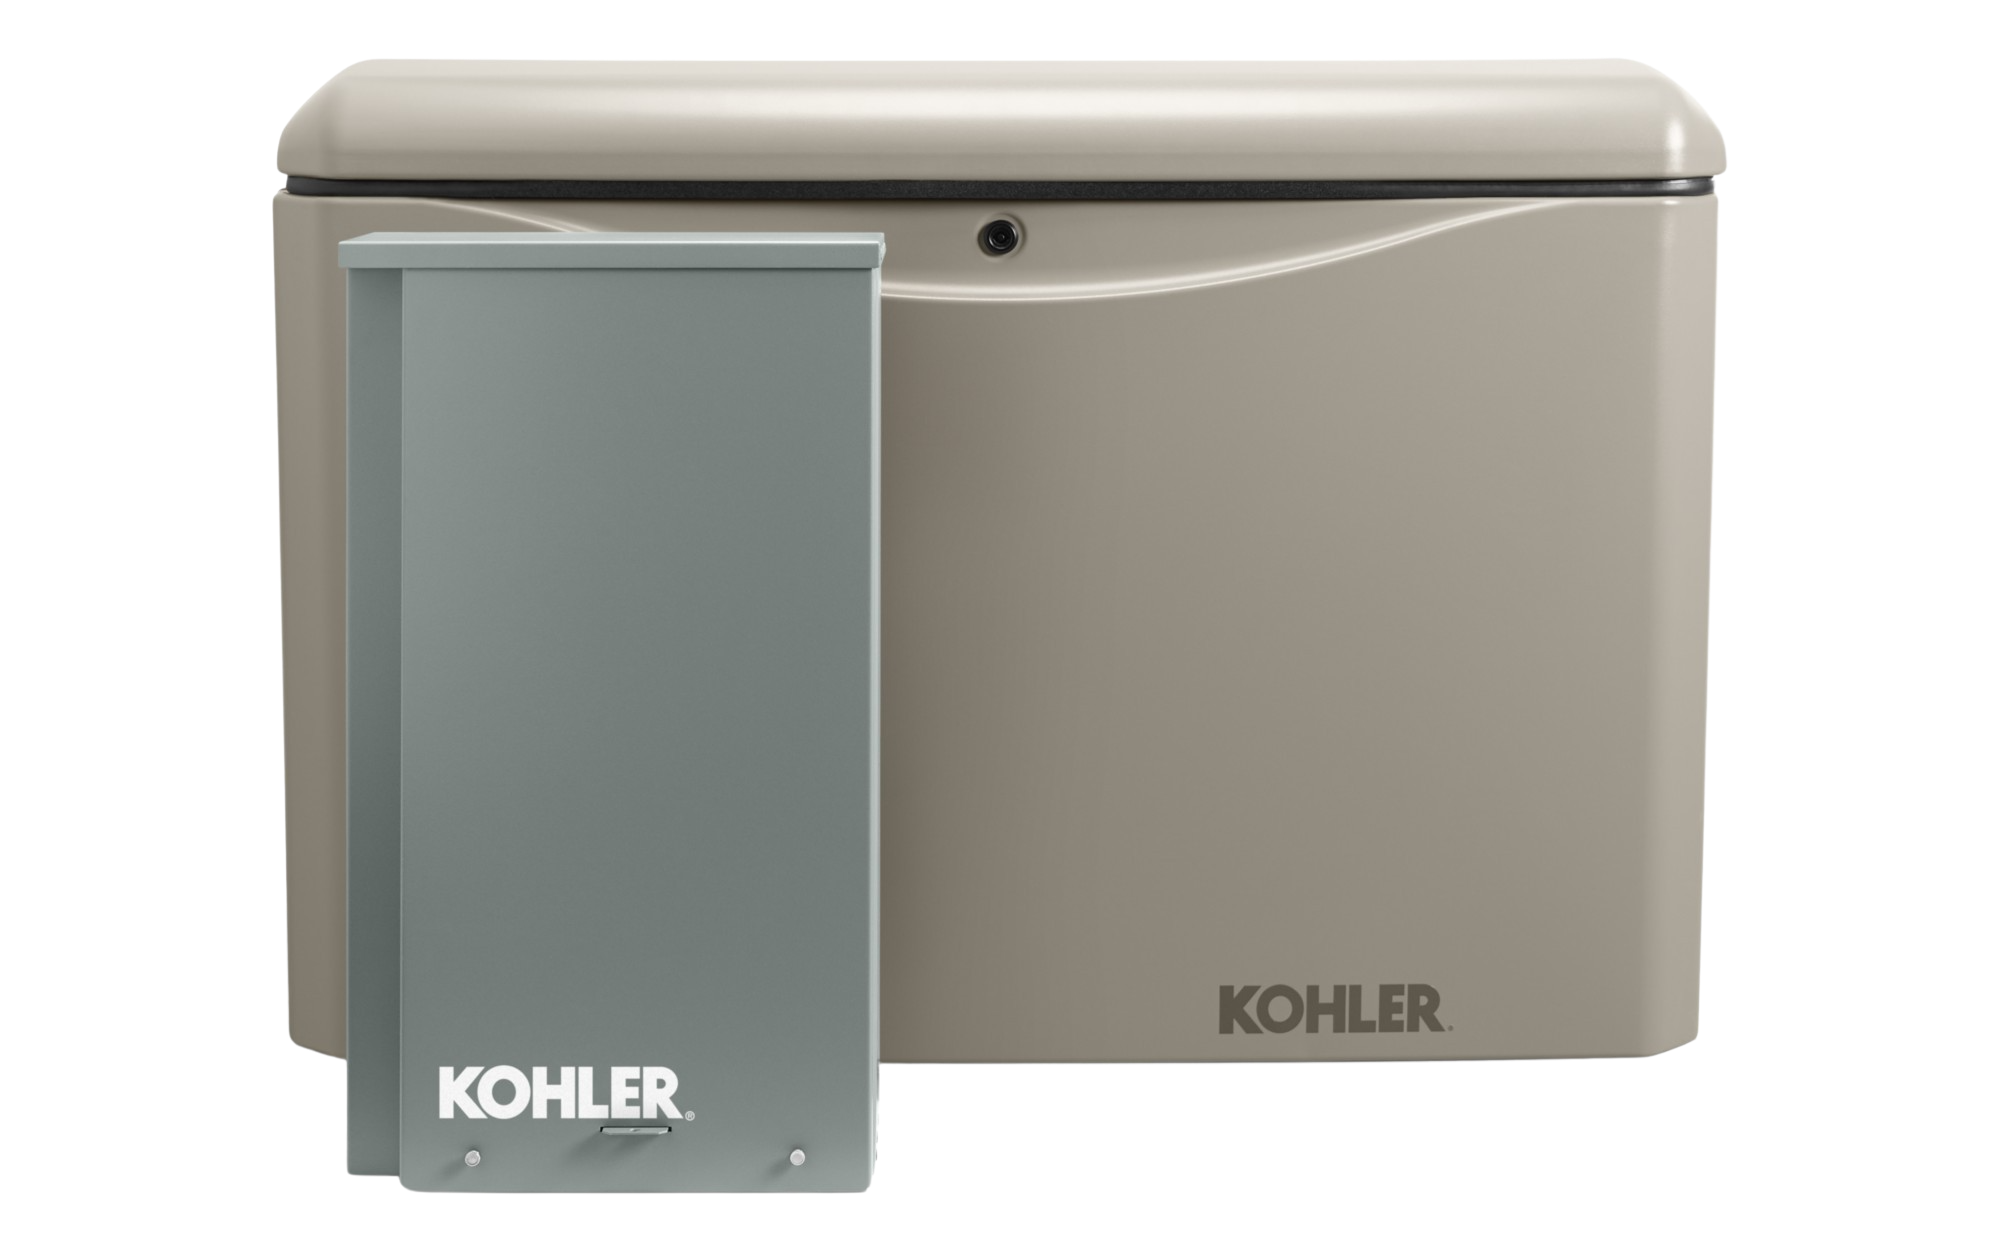 Kohler, Kohler 14RCAL-200SELS 14KW Standby Generator with 200 Amp Automatic Transfer Switch and OnCue Plus New